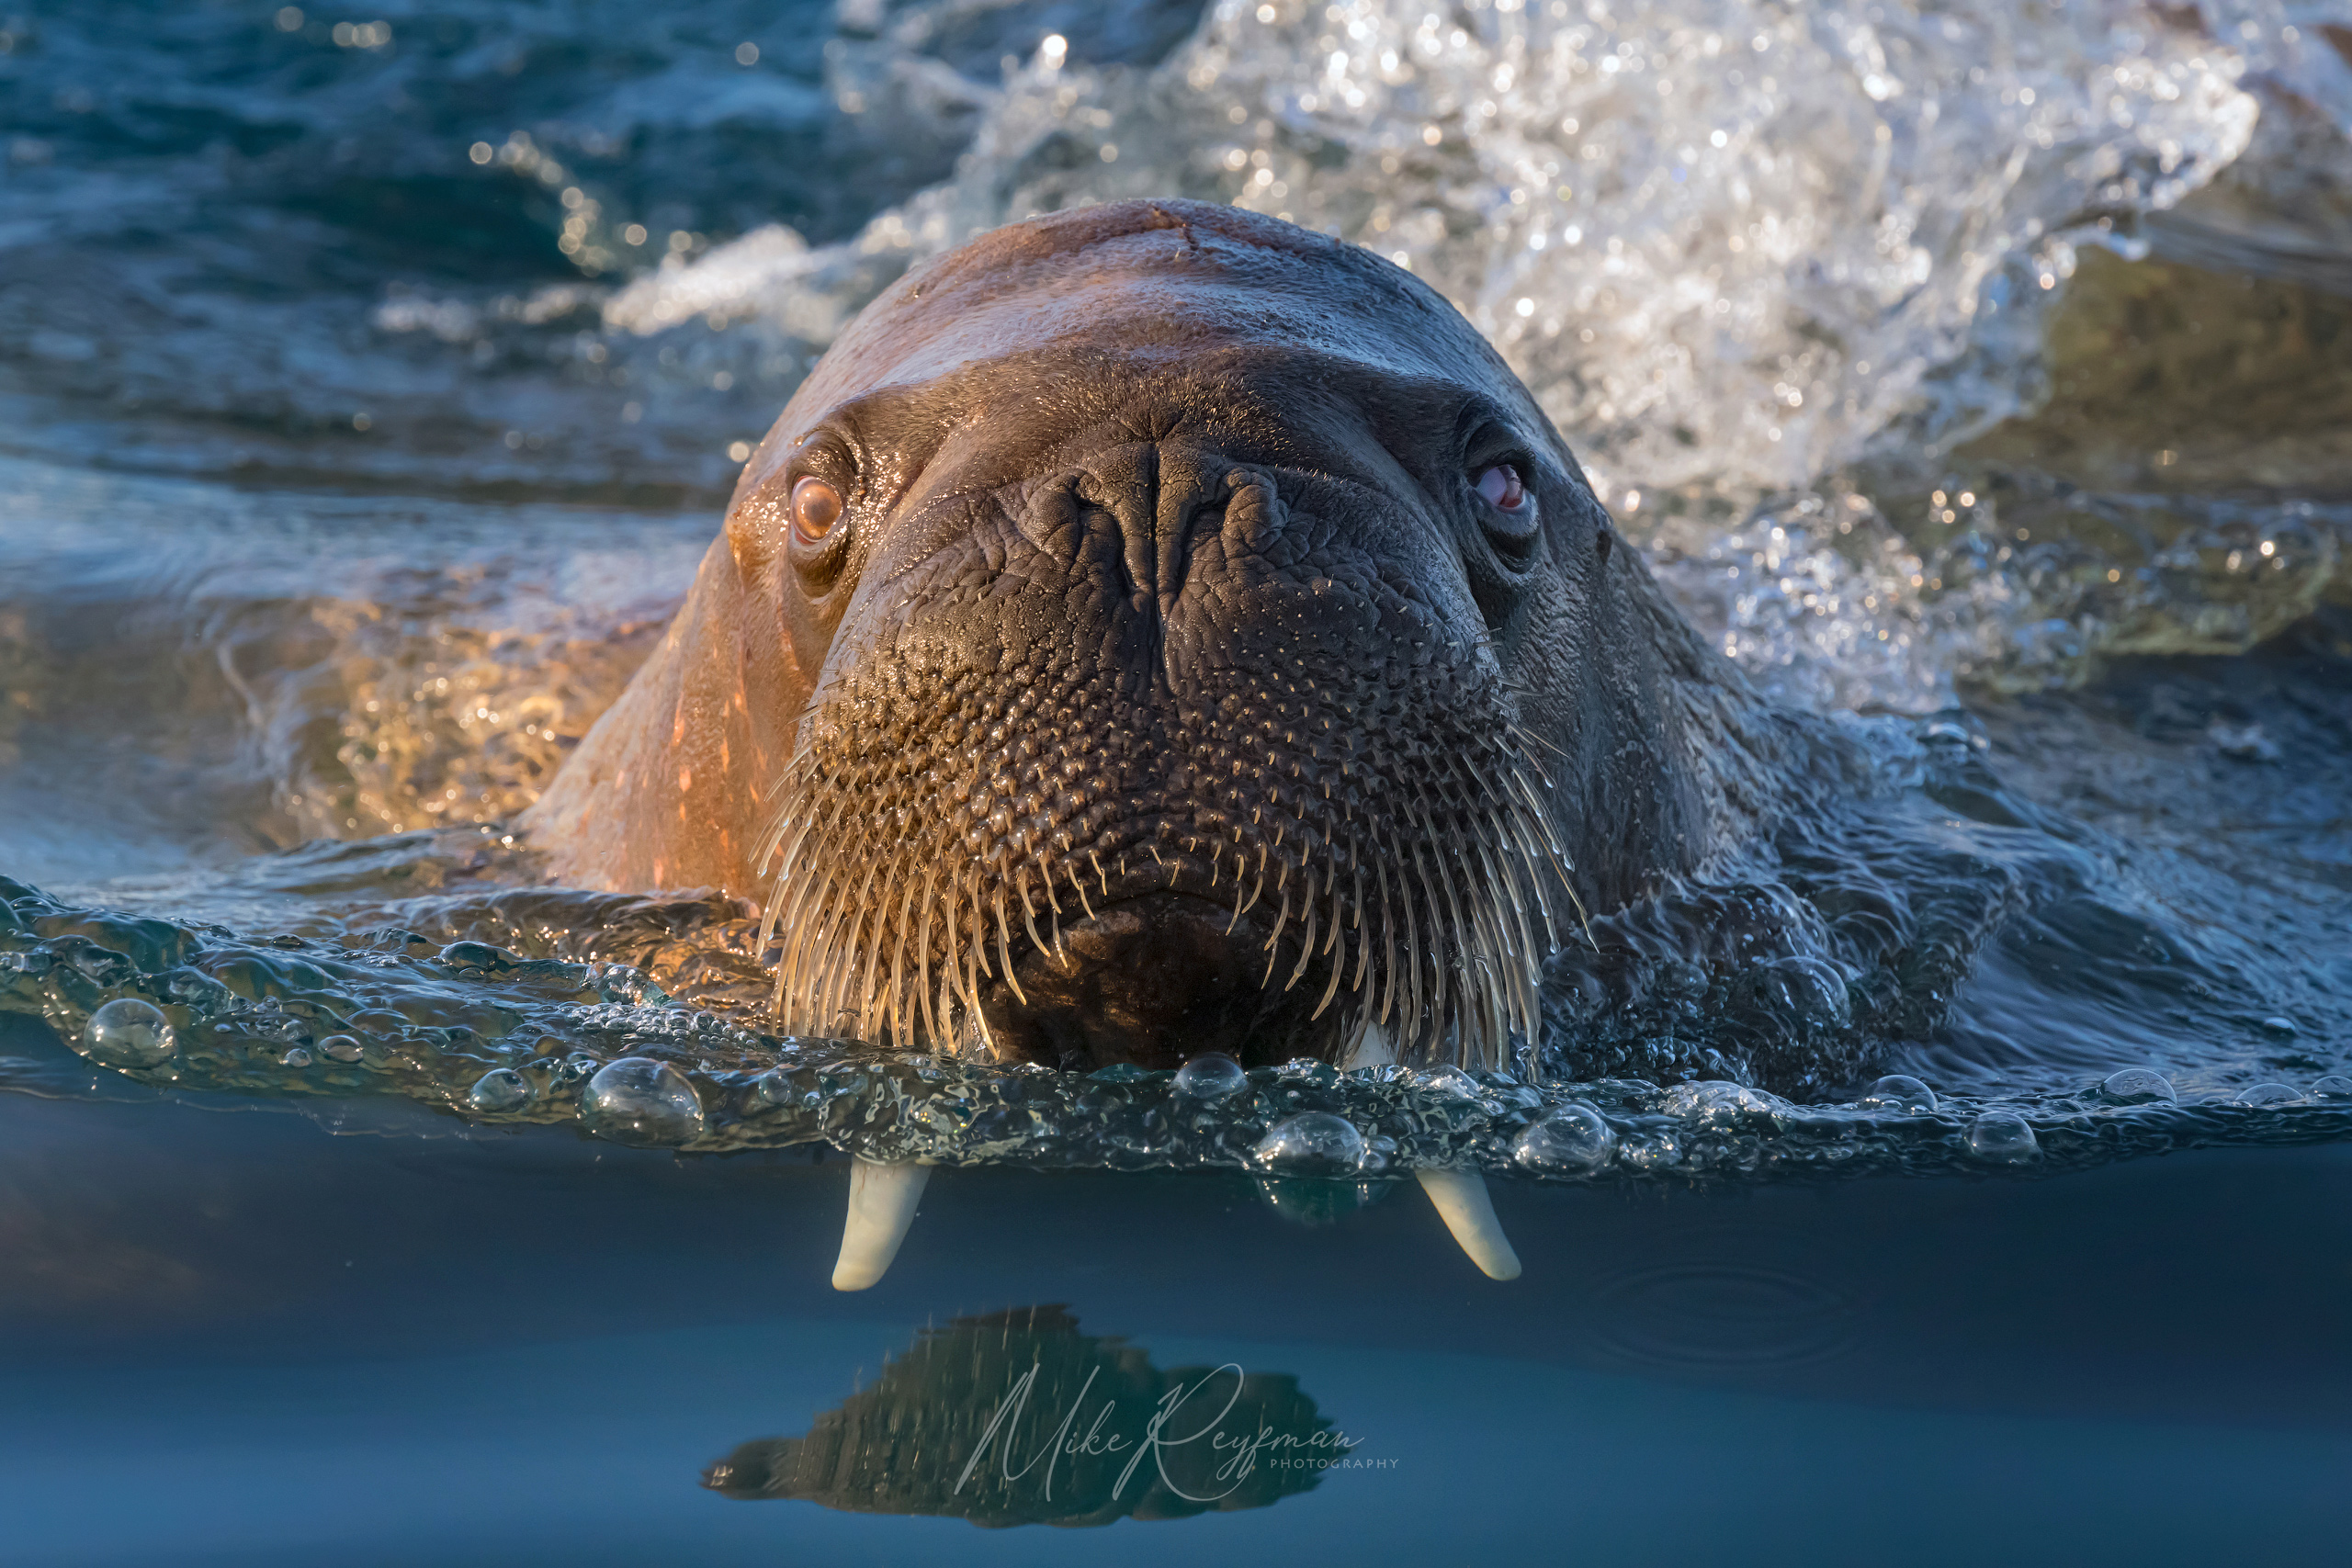 The Gang of Walruses WL-SV-001-Z8A6827 - The Walruses and Seals of Svalbard (Spitsbergen) - Mike Reyfman Photography